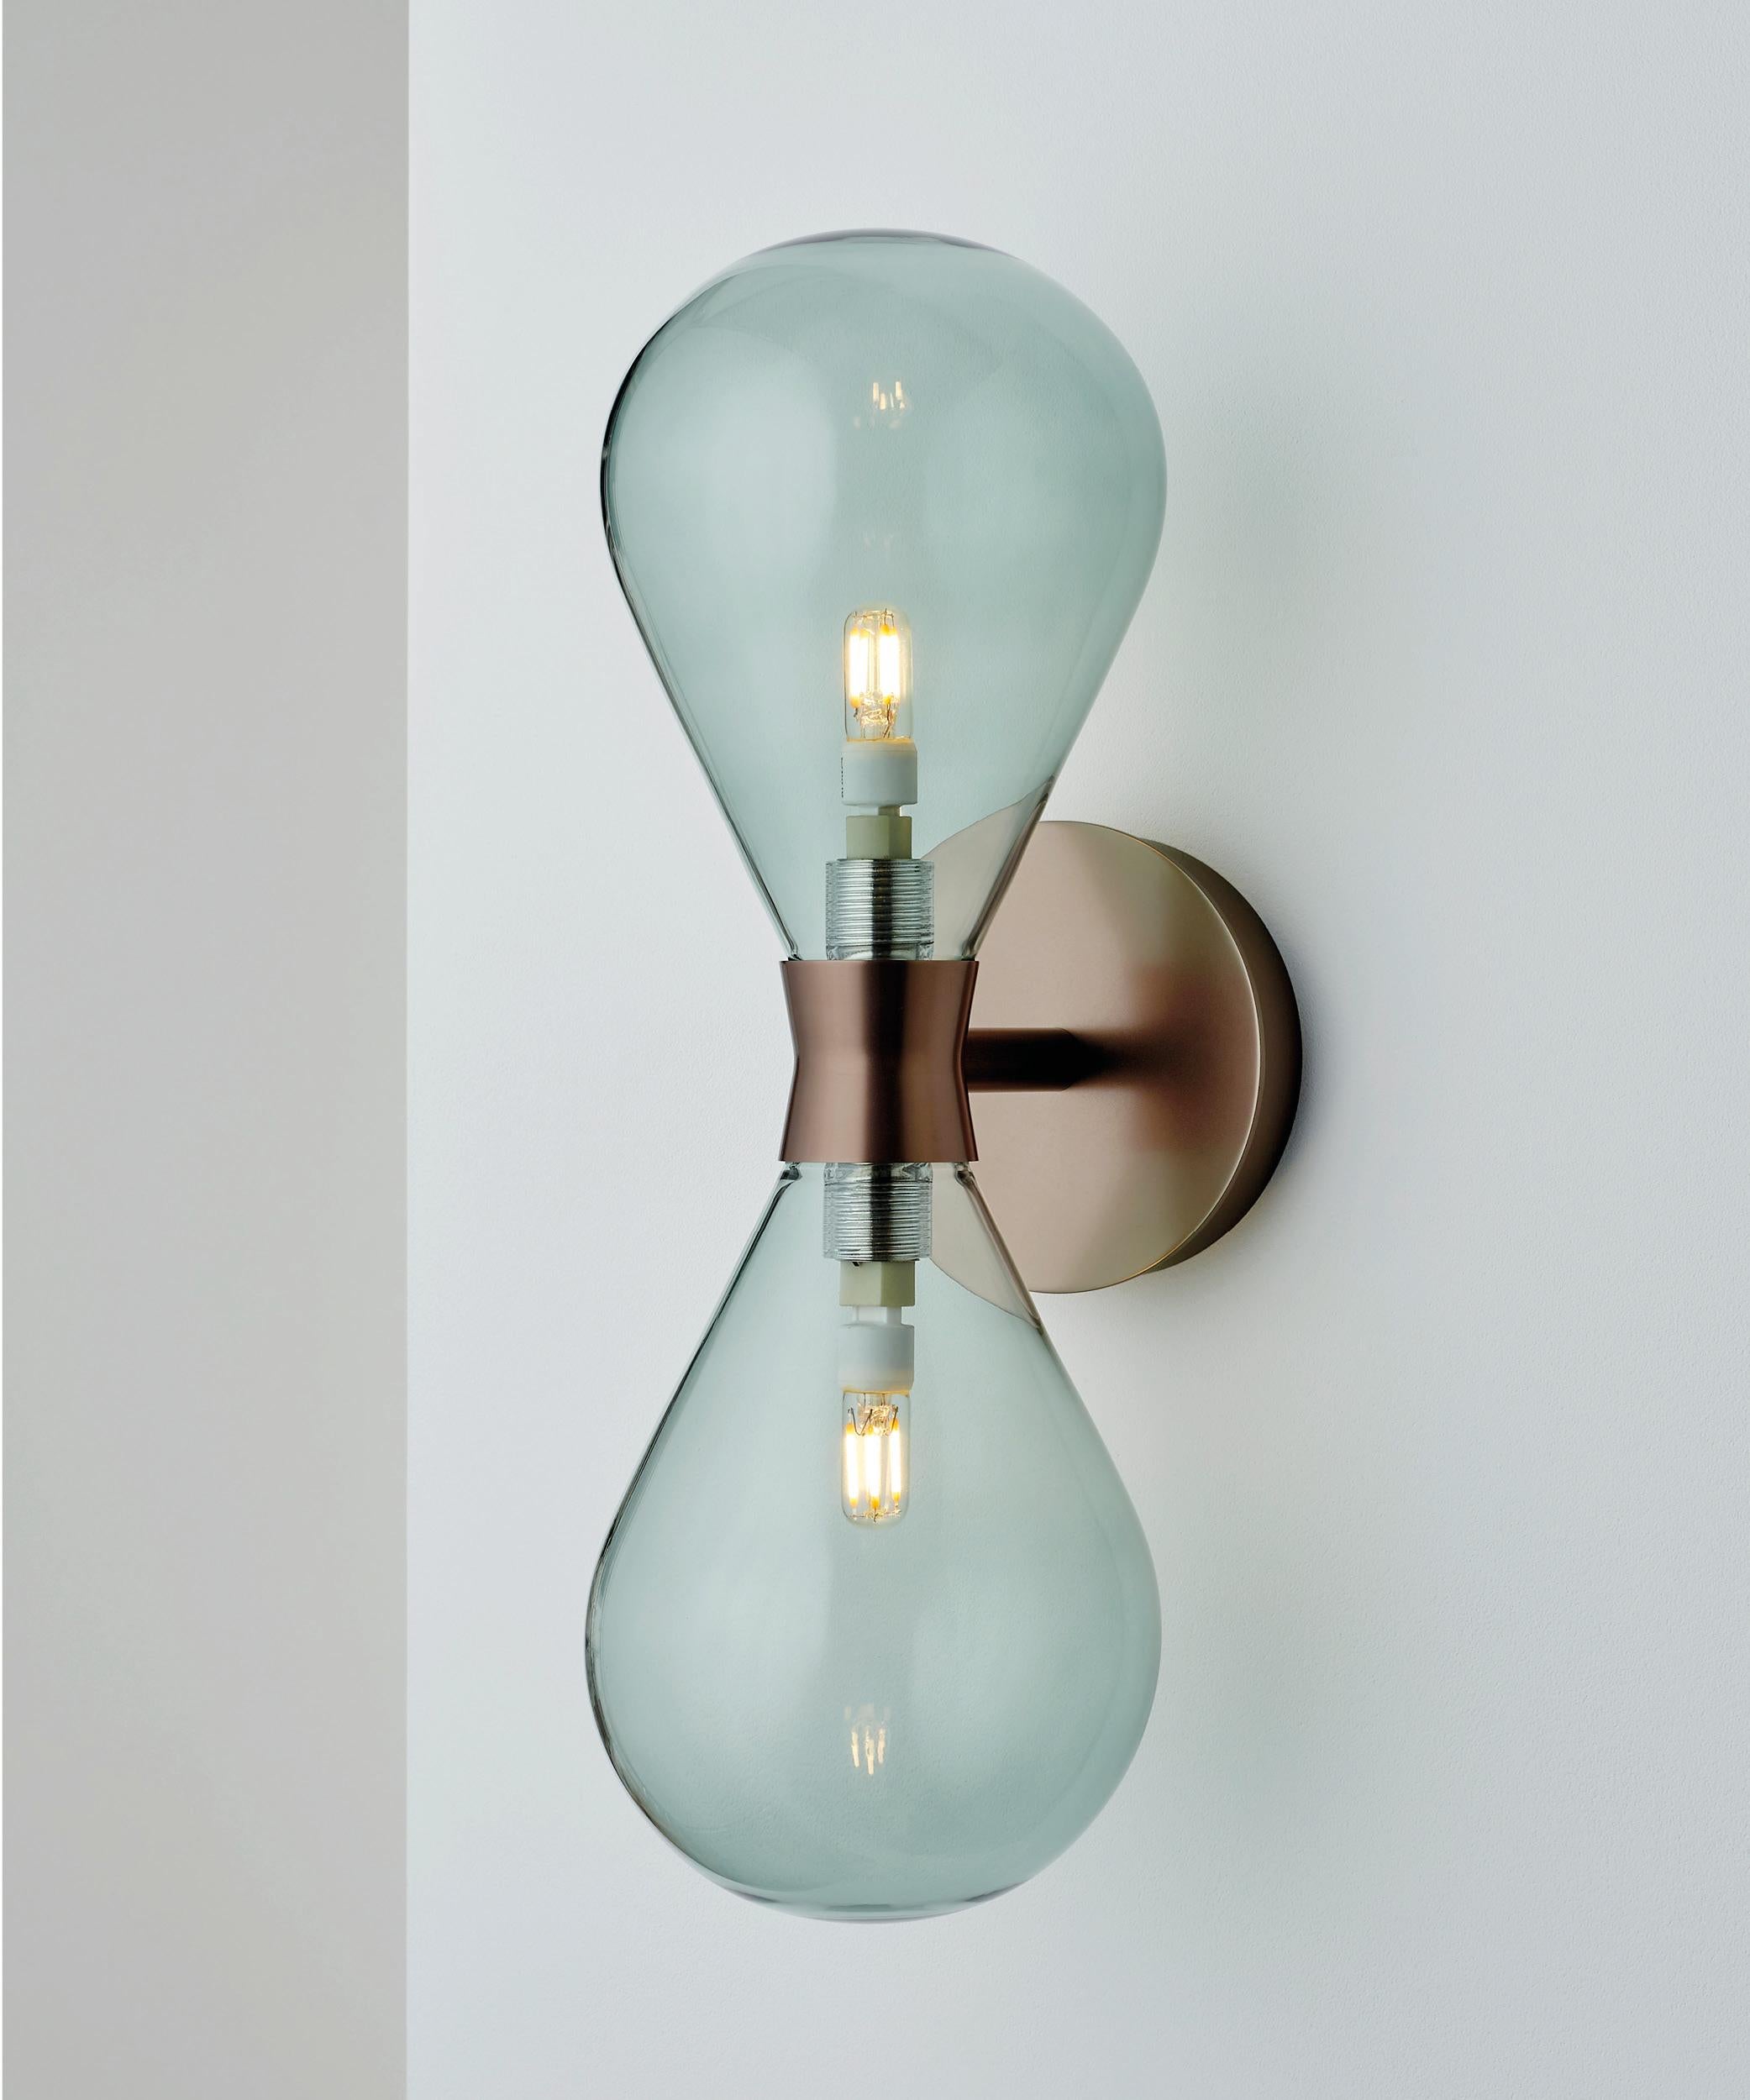 A larger version of the Cintola Wall Light, the Twin adds vertical height and presence to the rounded profile of its sibling. Available in a range of standard and custom finishes, alongside a selection of complementary glass colours.

Custom finish